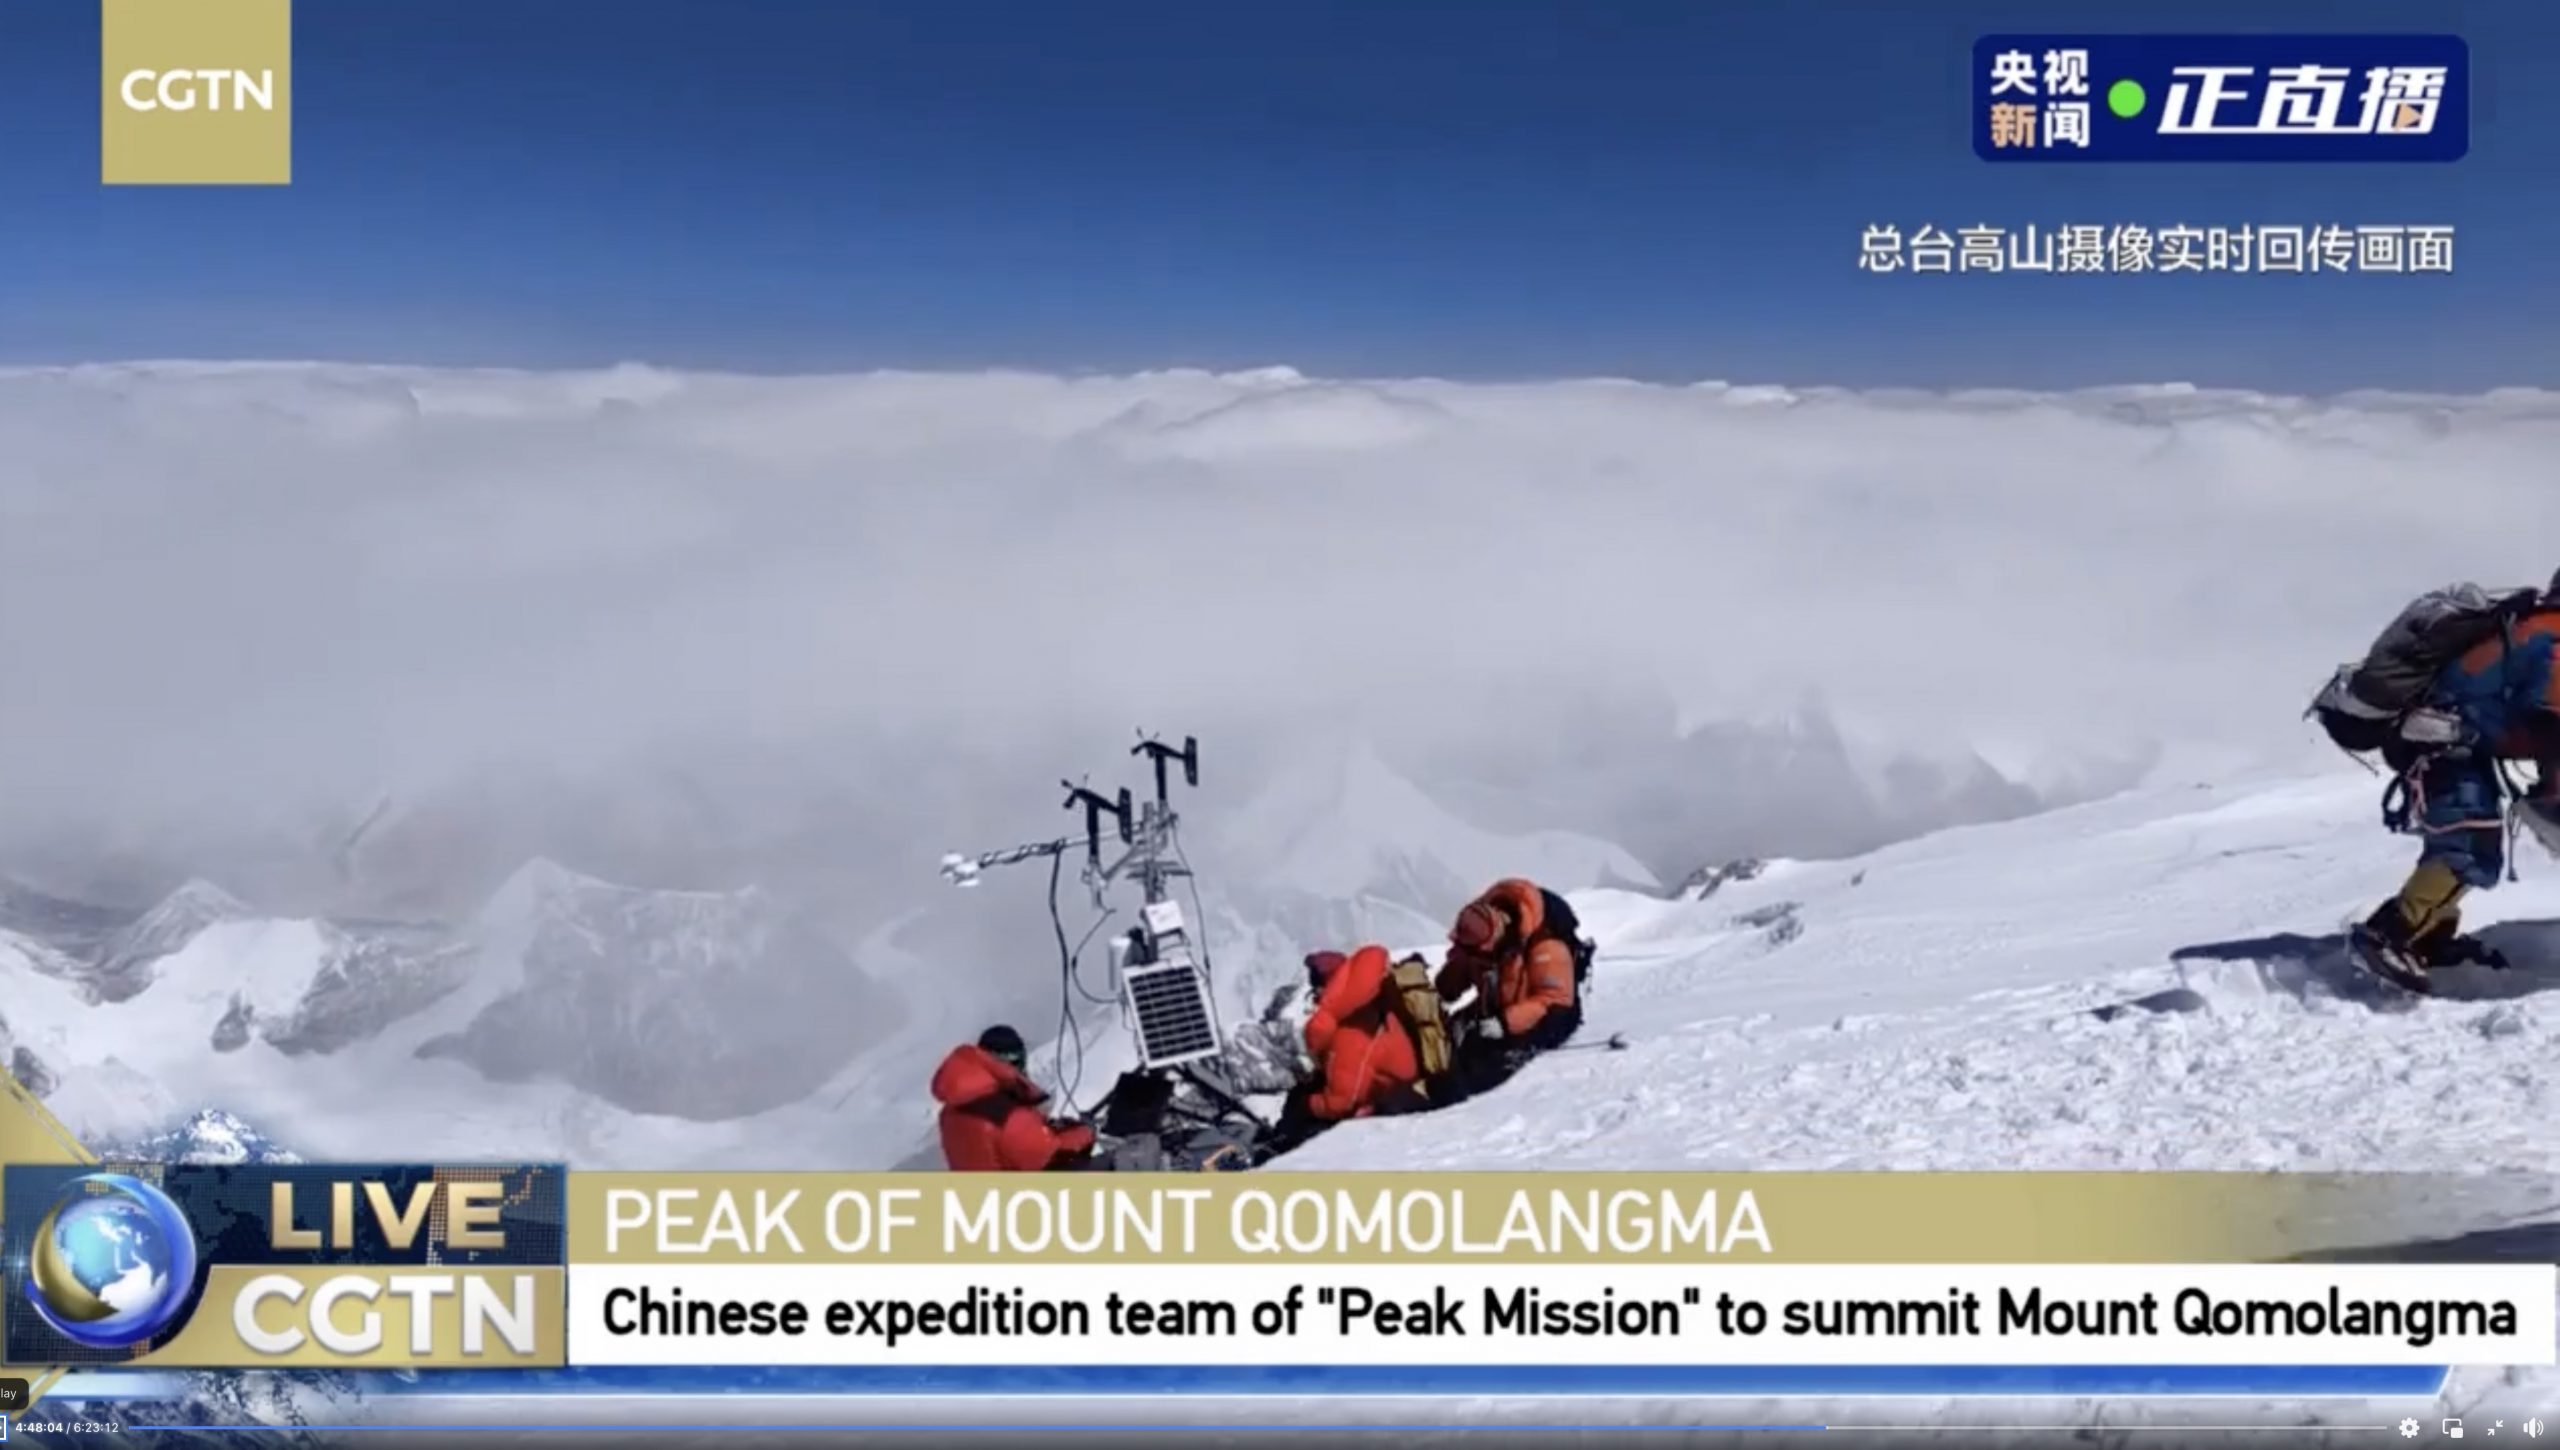 Weather Stations on Mount Everest